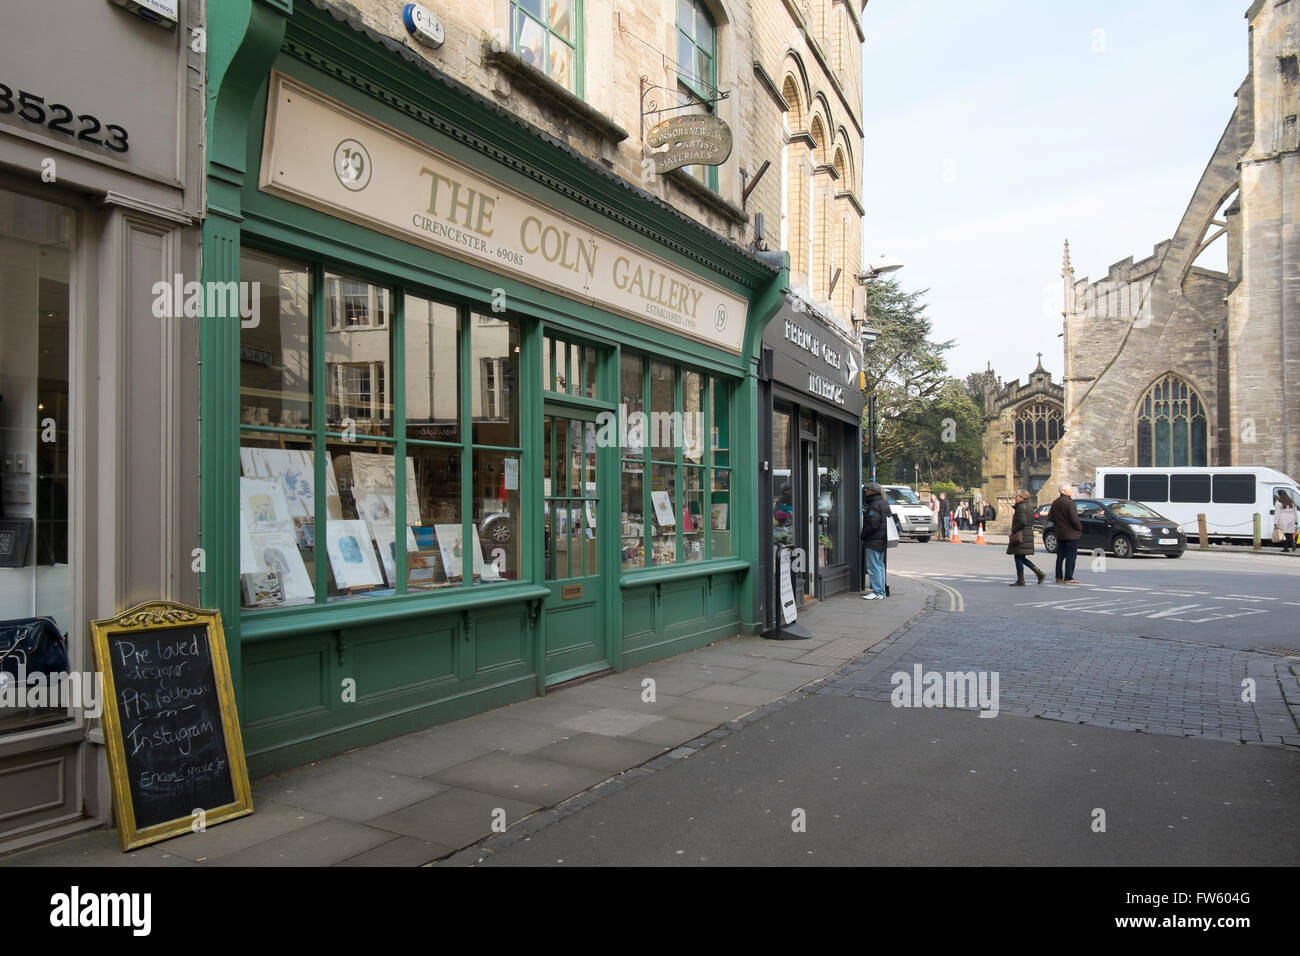 The Coln Gallery art materials shop in Black Jack Street, Cirencester, Gloucestershire, UK Stock Photo